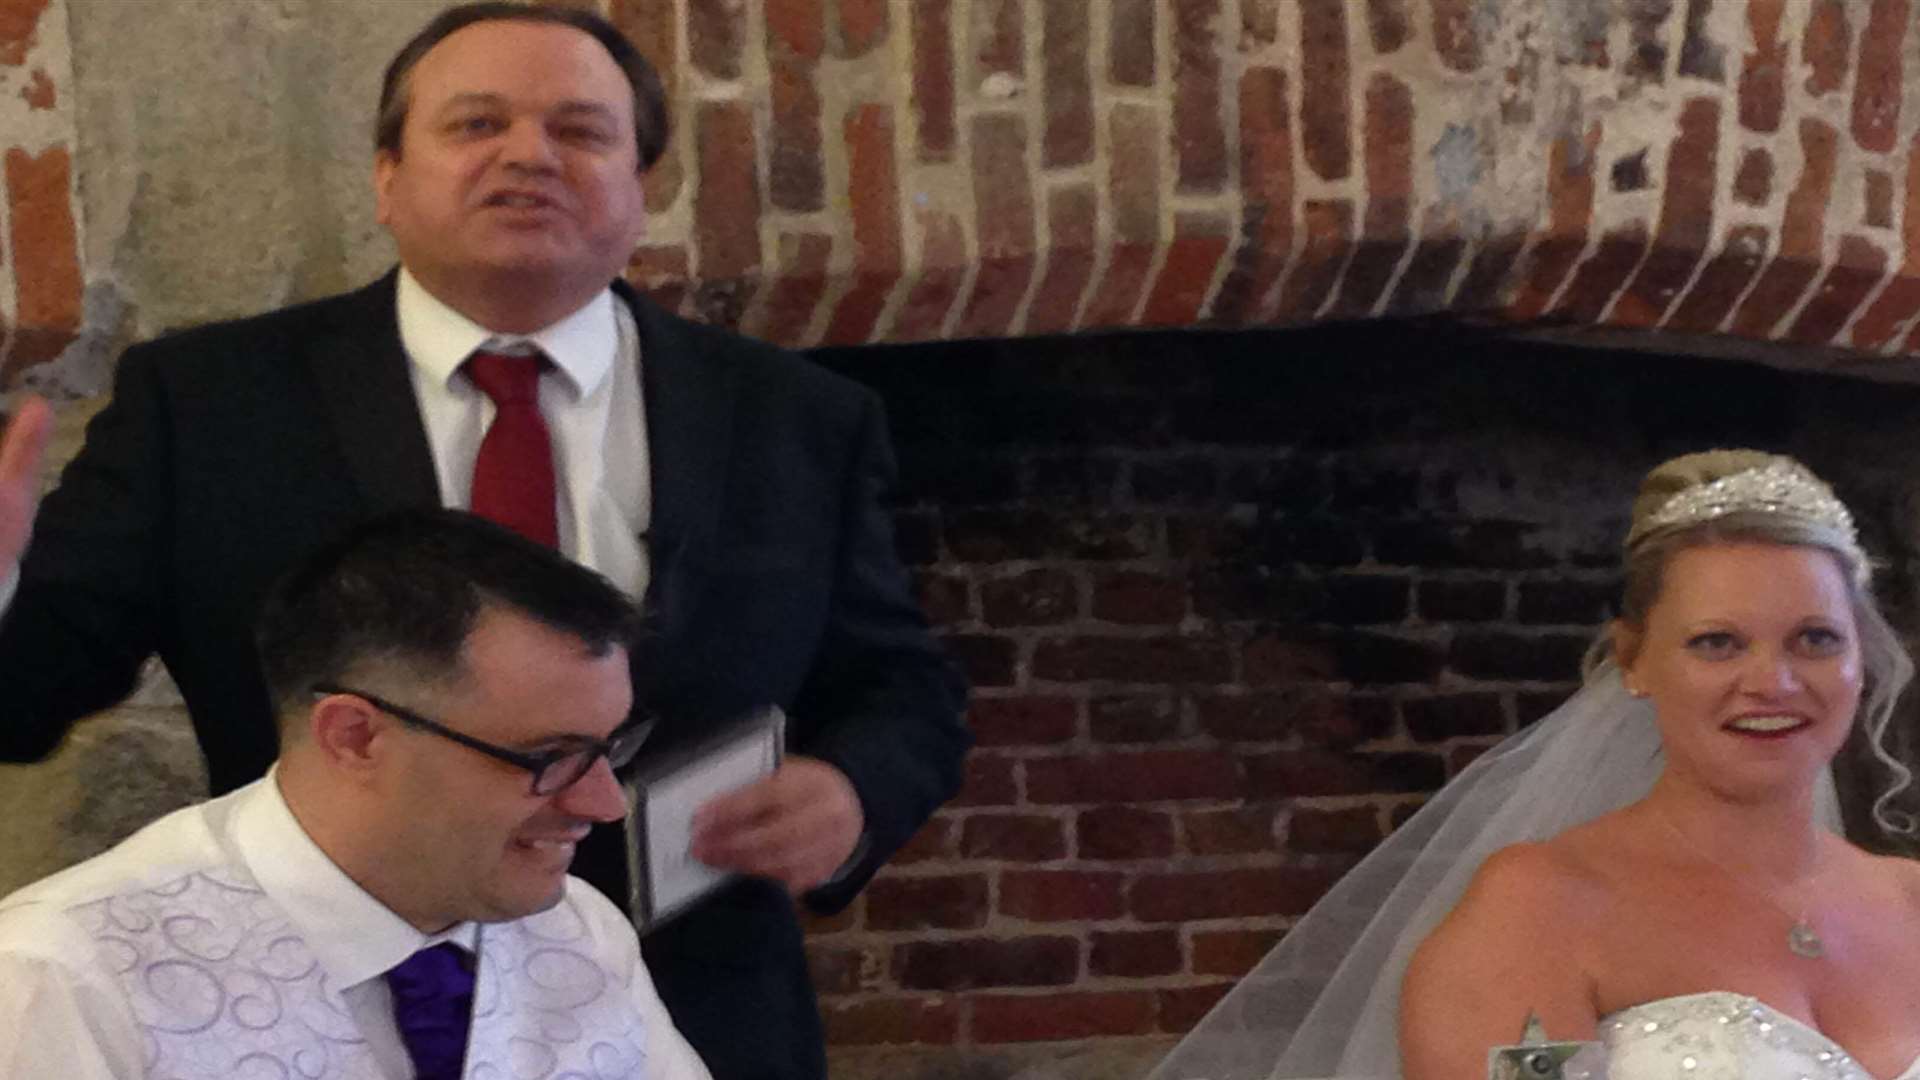 Former EastEnders star Shaun Williamson made a guest appearance at Stuart and Kirsty's wedding